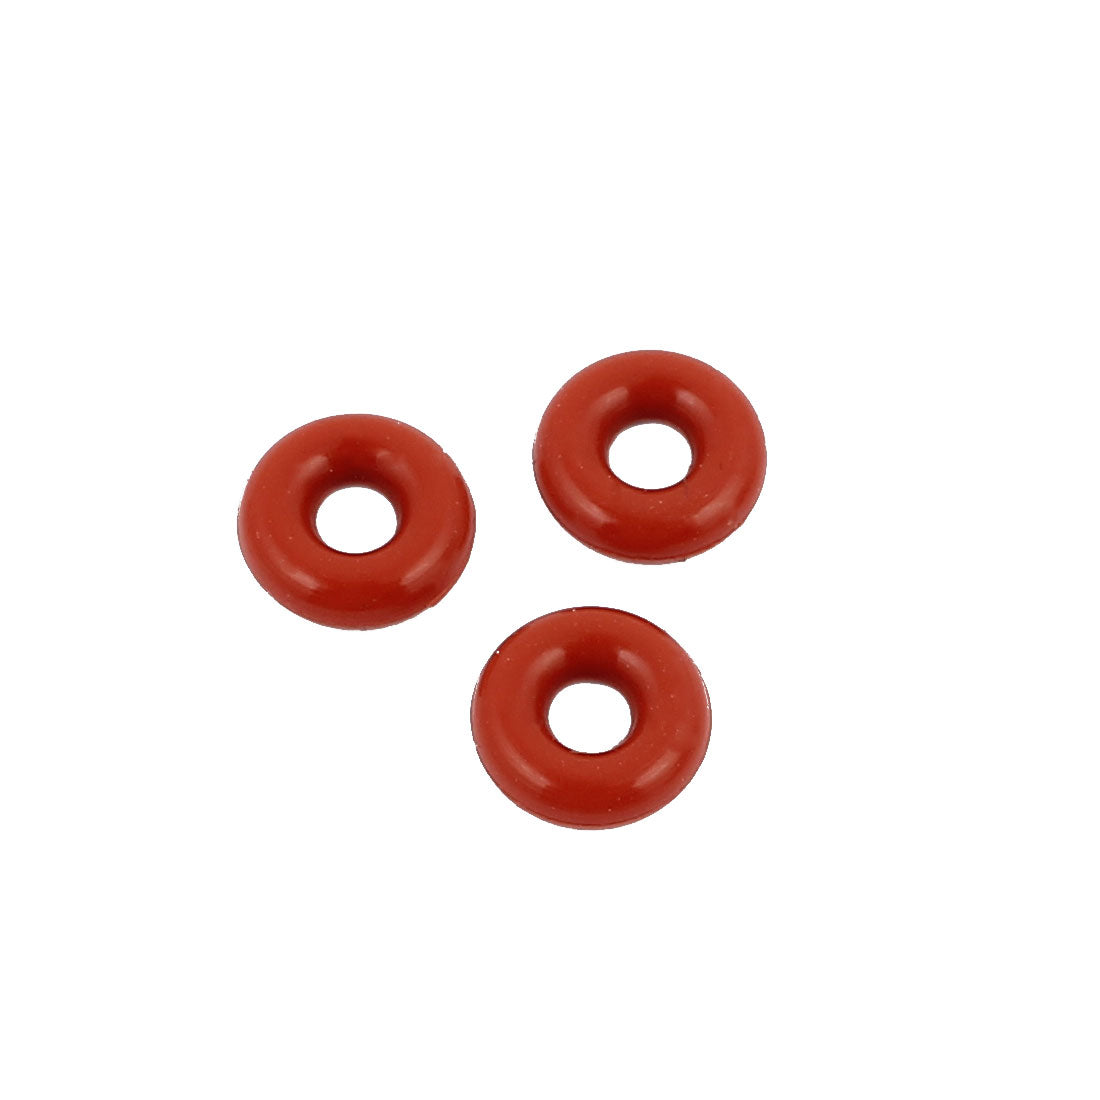 uxcell Uxcell 10Pcs 6mm x 1.9mm Rubber O-rings NBR Heat Resistant Sealing Ring Grommets Red